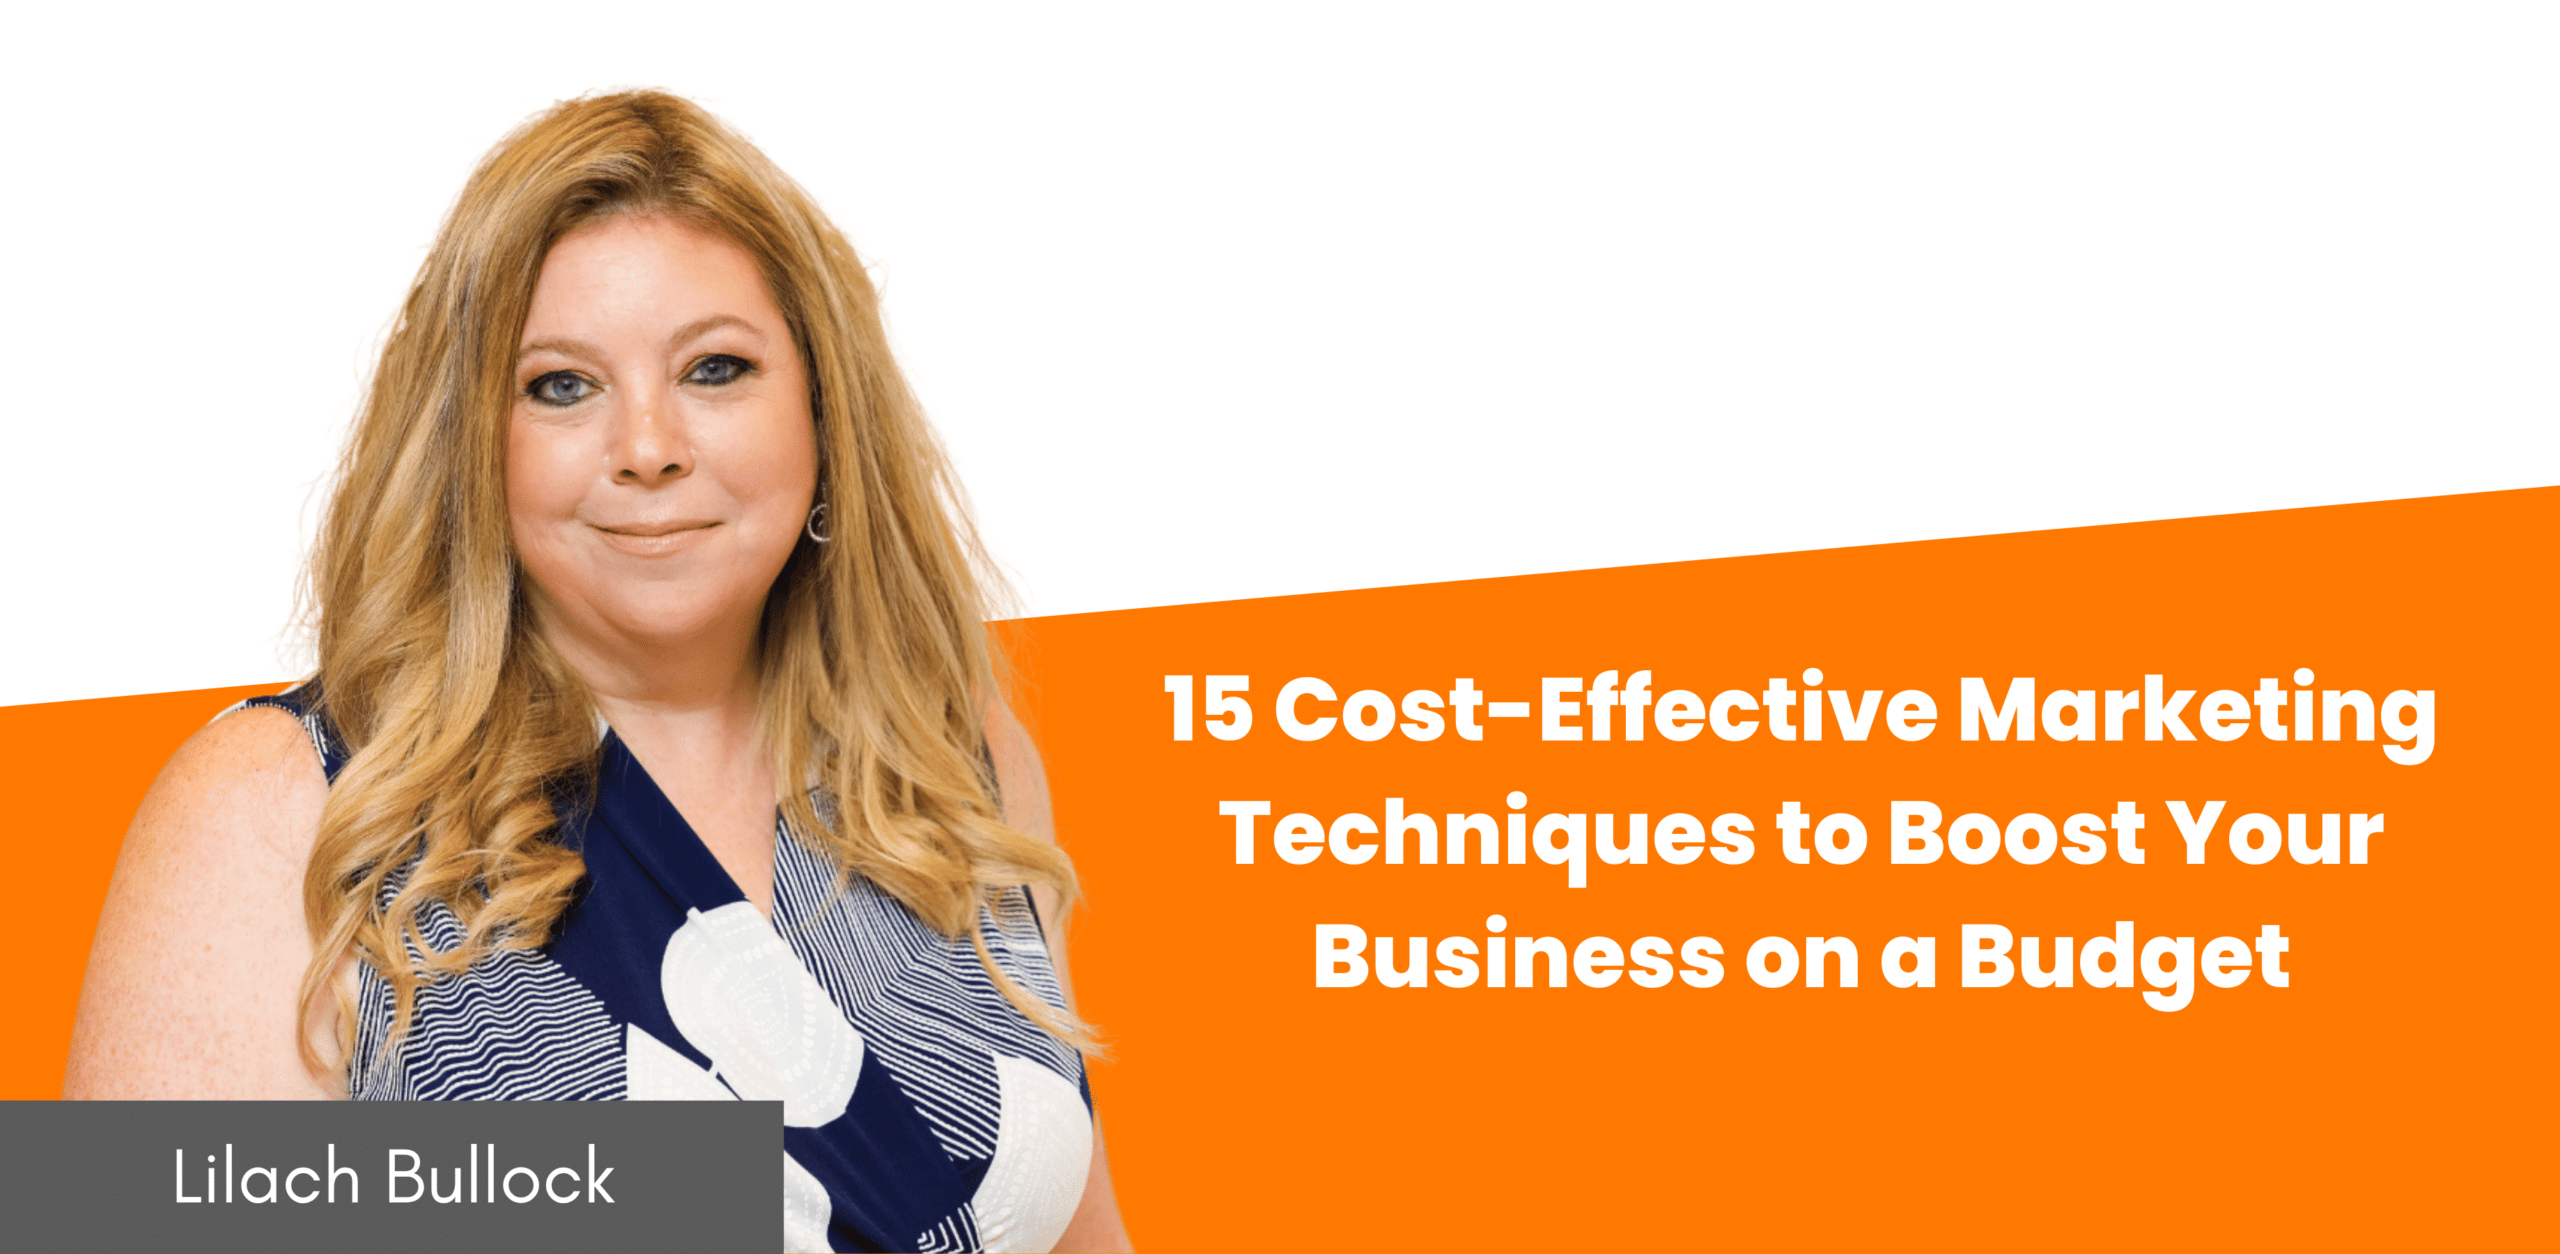 15 Cost-Effective Marketing Techniques to Boost Your Business on a Budget